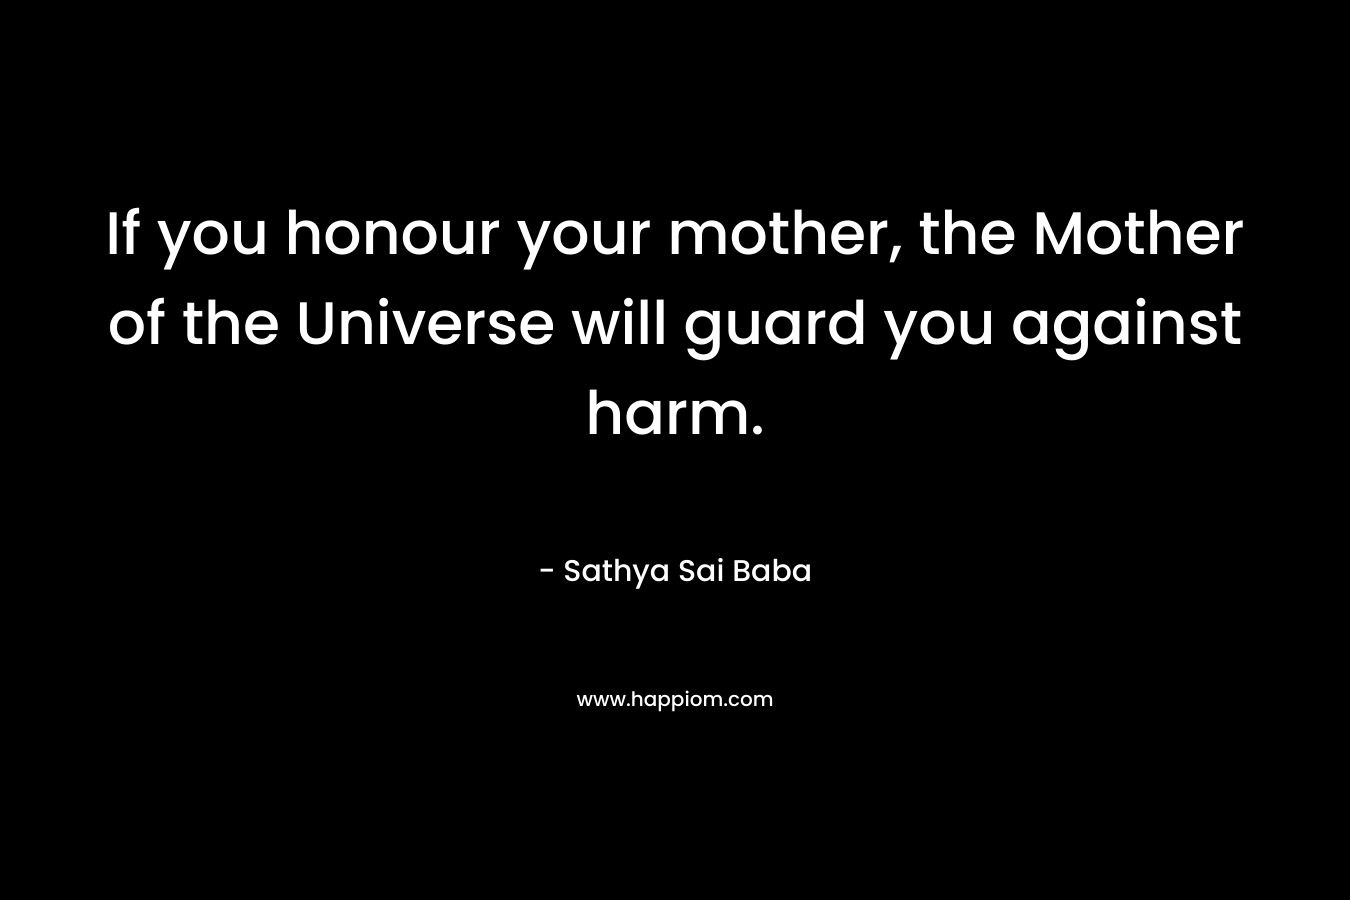 If you honour your mother, the Mother of the Universe will guard you against harm. – Sathya Sai Baba